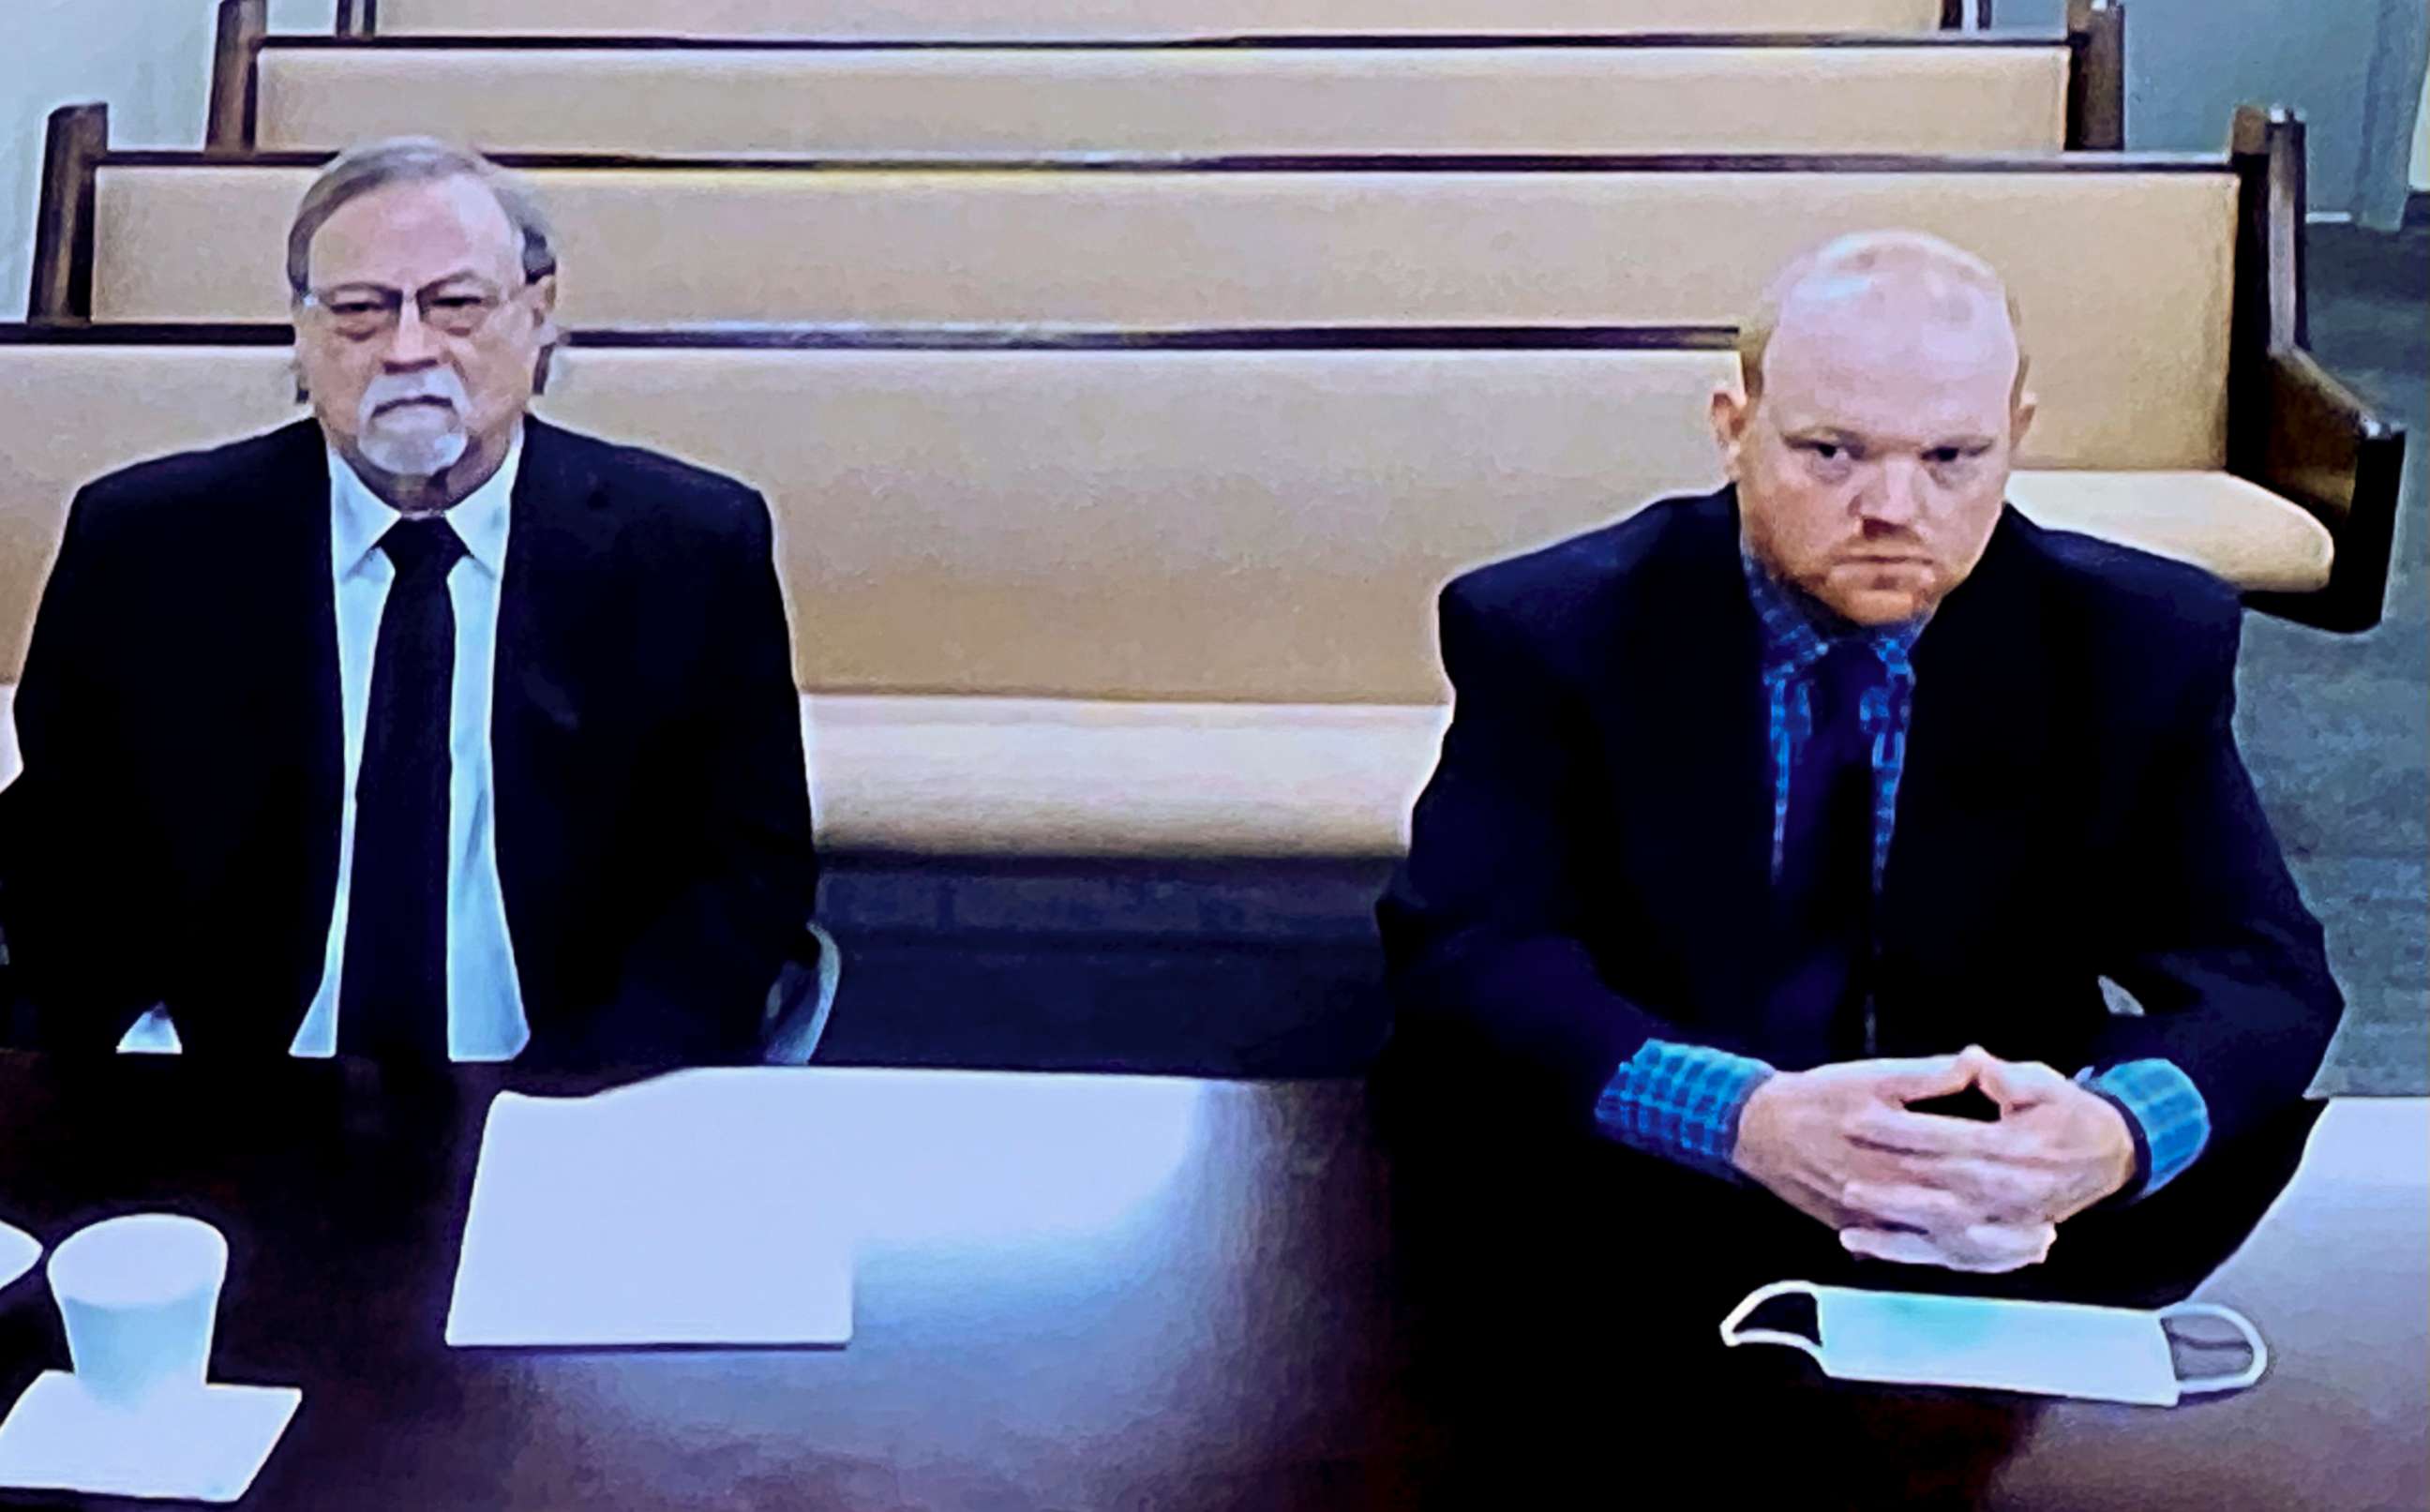 PHOTO: In this image made from video, from left, Gregory and Travis McMichael listen via closed circuit tv in the Glynn County Detention center in Brunswick, Ga., Nov. 12, 2020, as lawyers argue for bond to be set at the Glynn County courthouse.